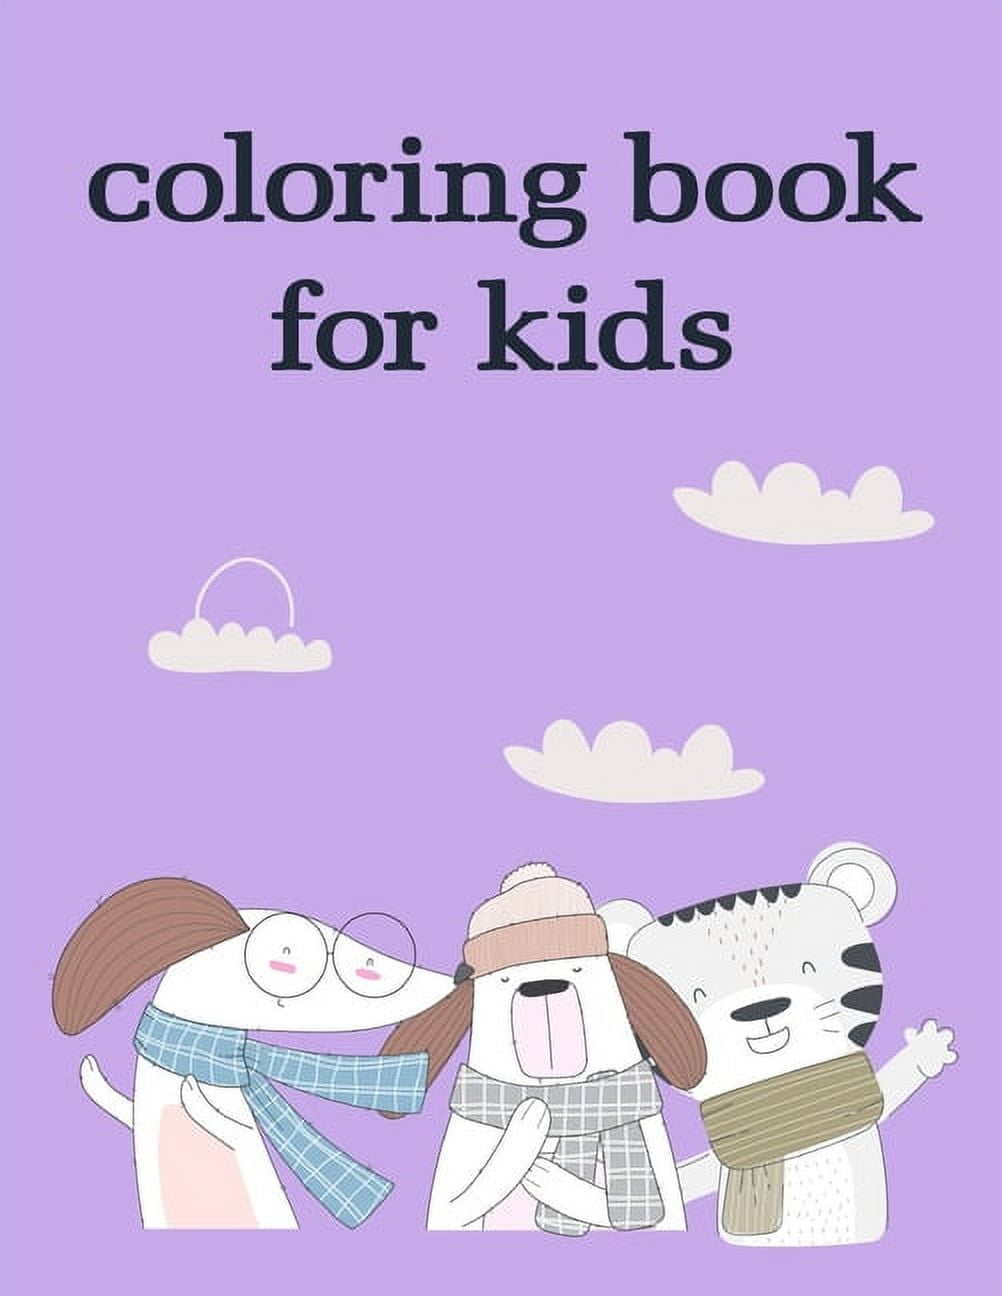 Childrens Coloring Books: Mind Relaxation Everyday Tools from Pets